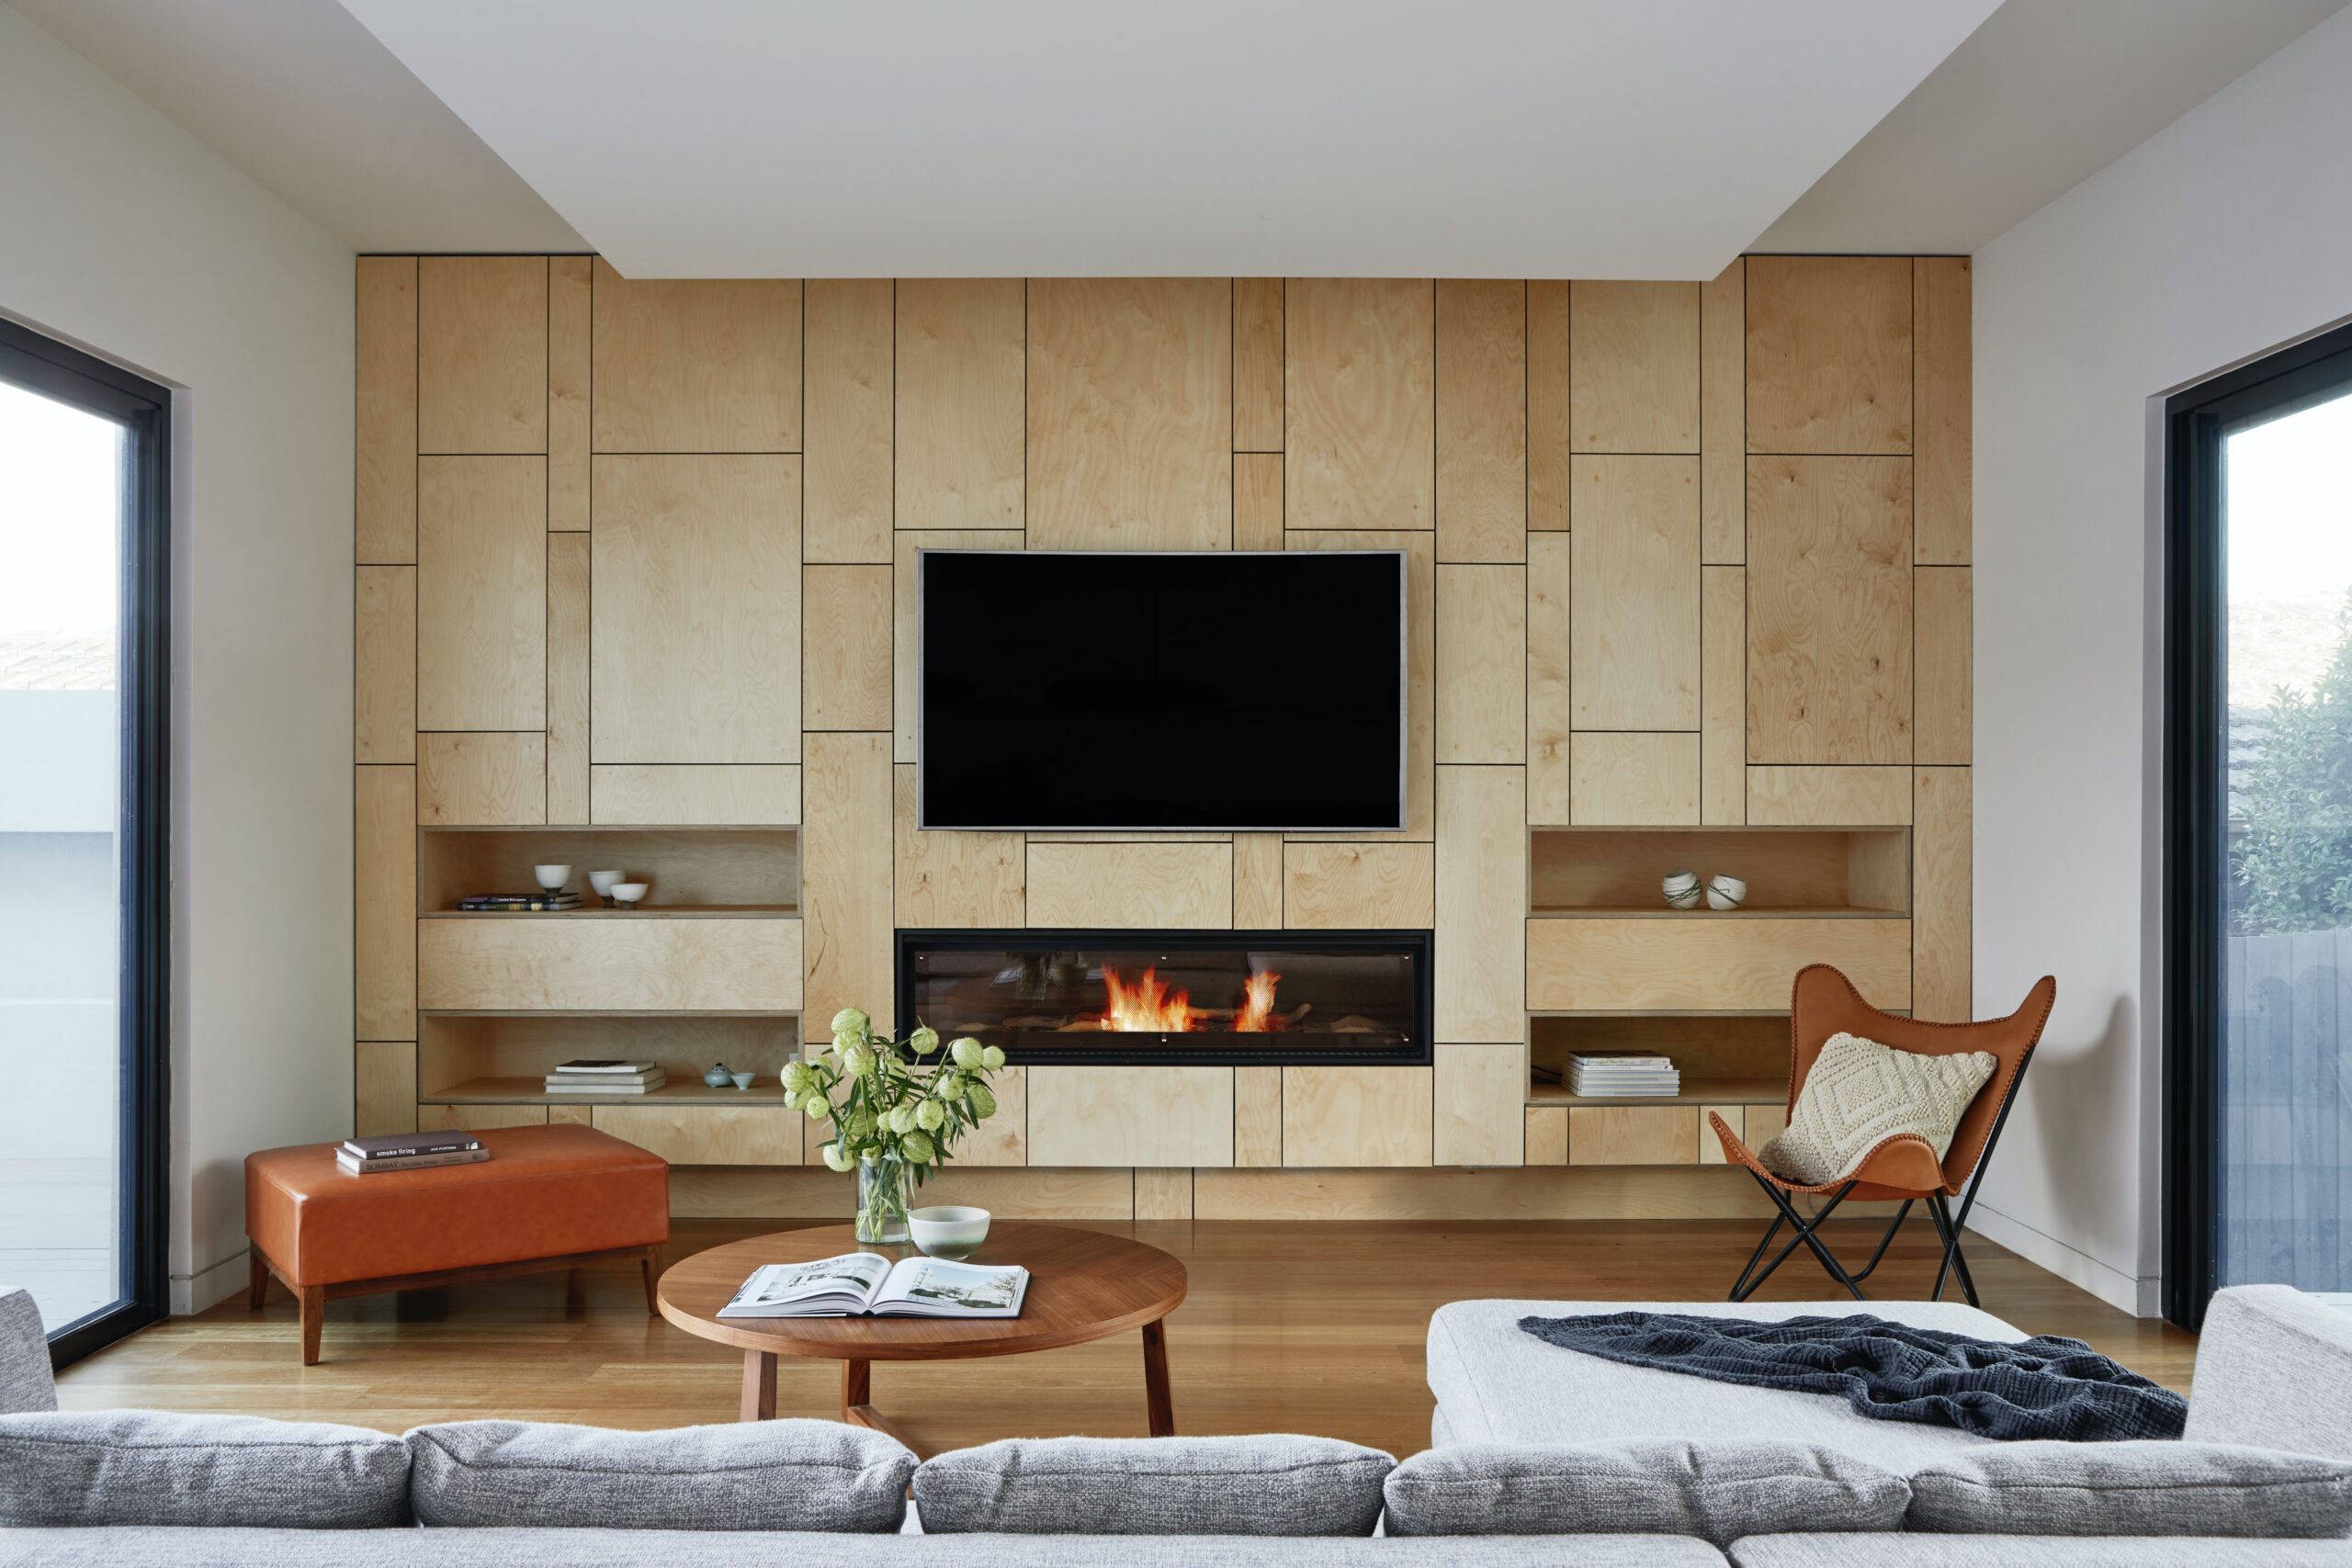 Add a TV above the fireplace for a seamless design with your small living room space. Pictured: A living room.